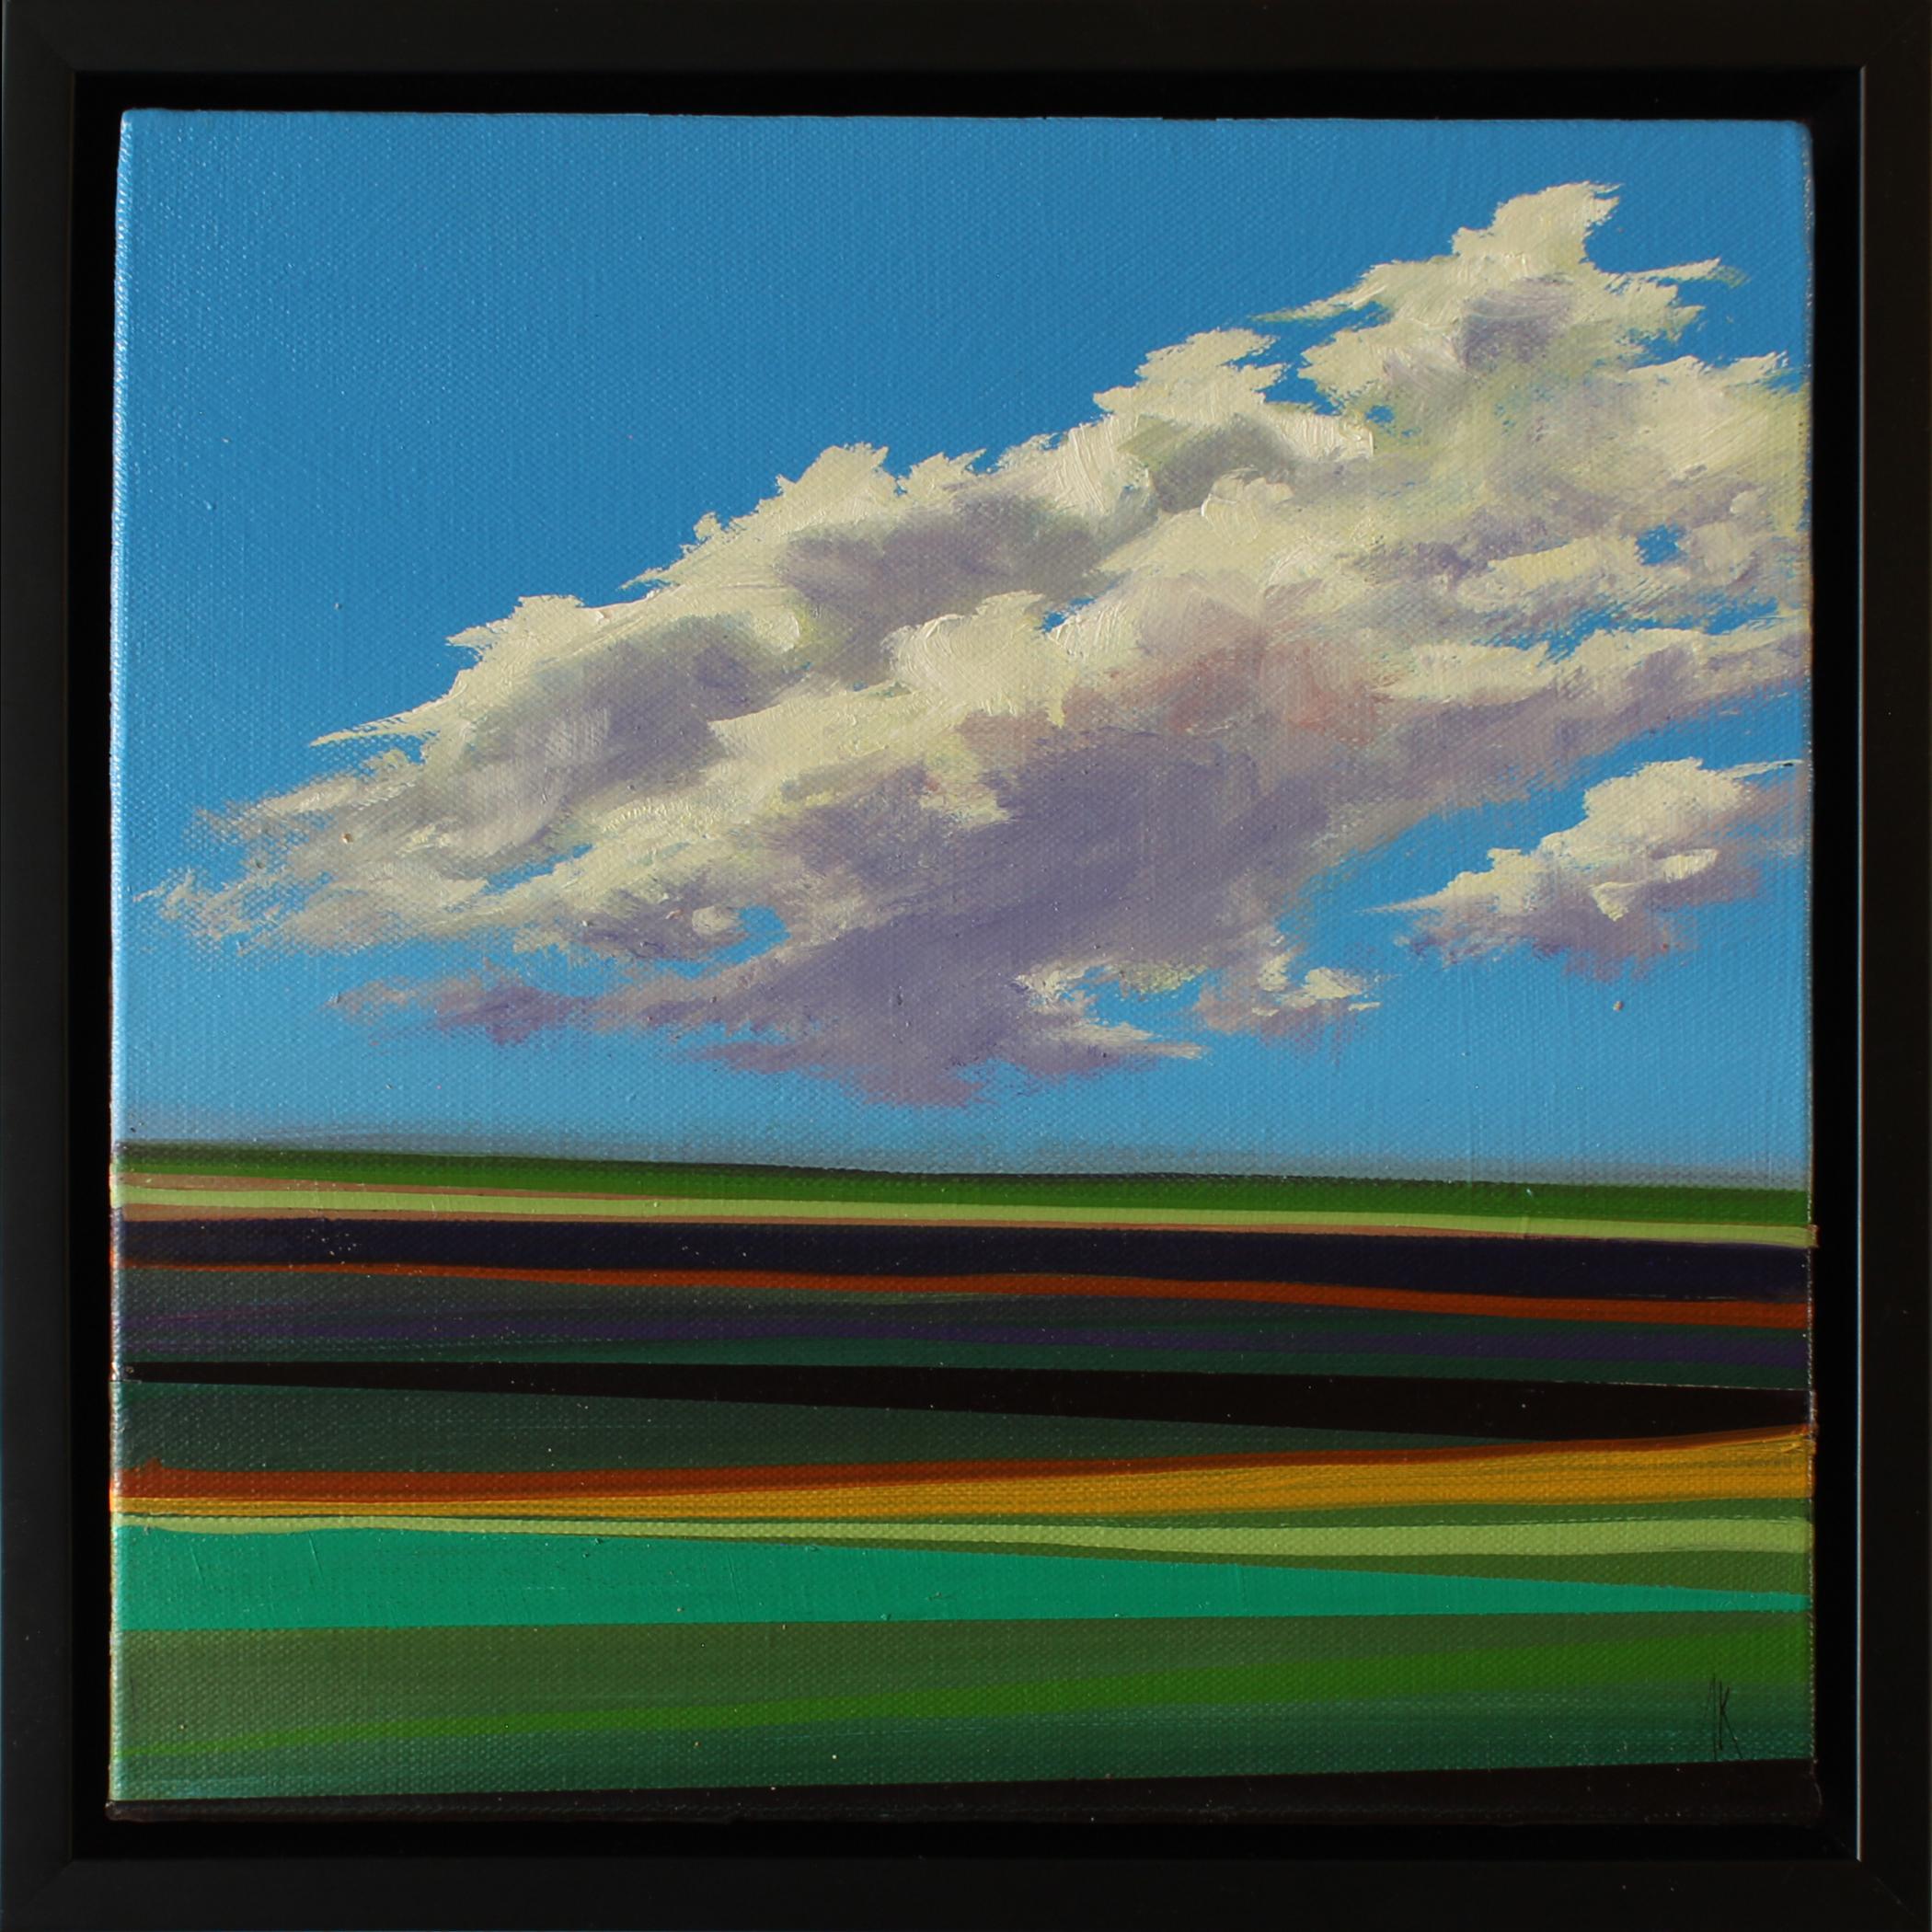 Alyson Kinkade Landscape Painting - Piece of the Sky no.16, 12x12", oil on linen